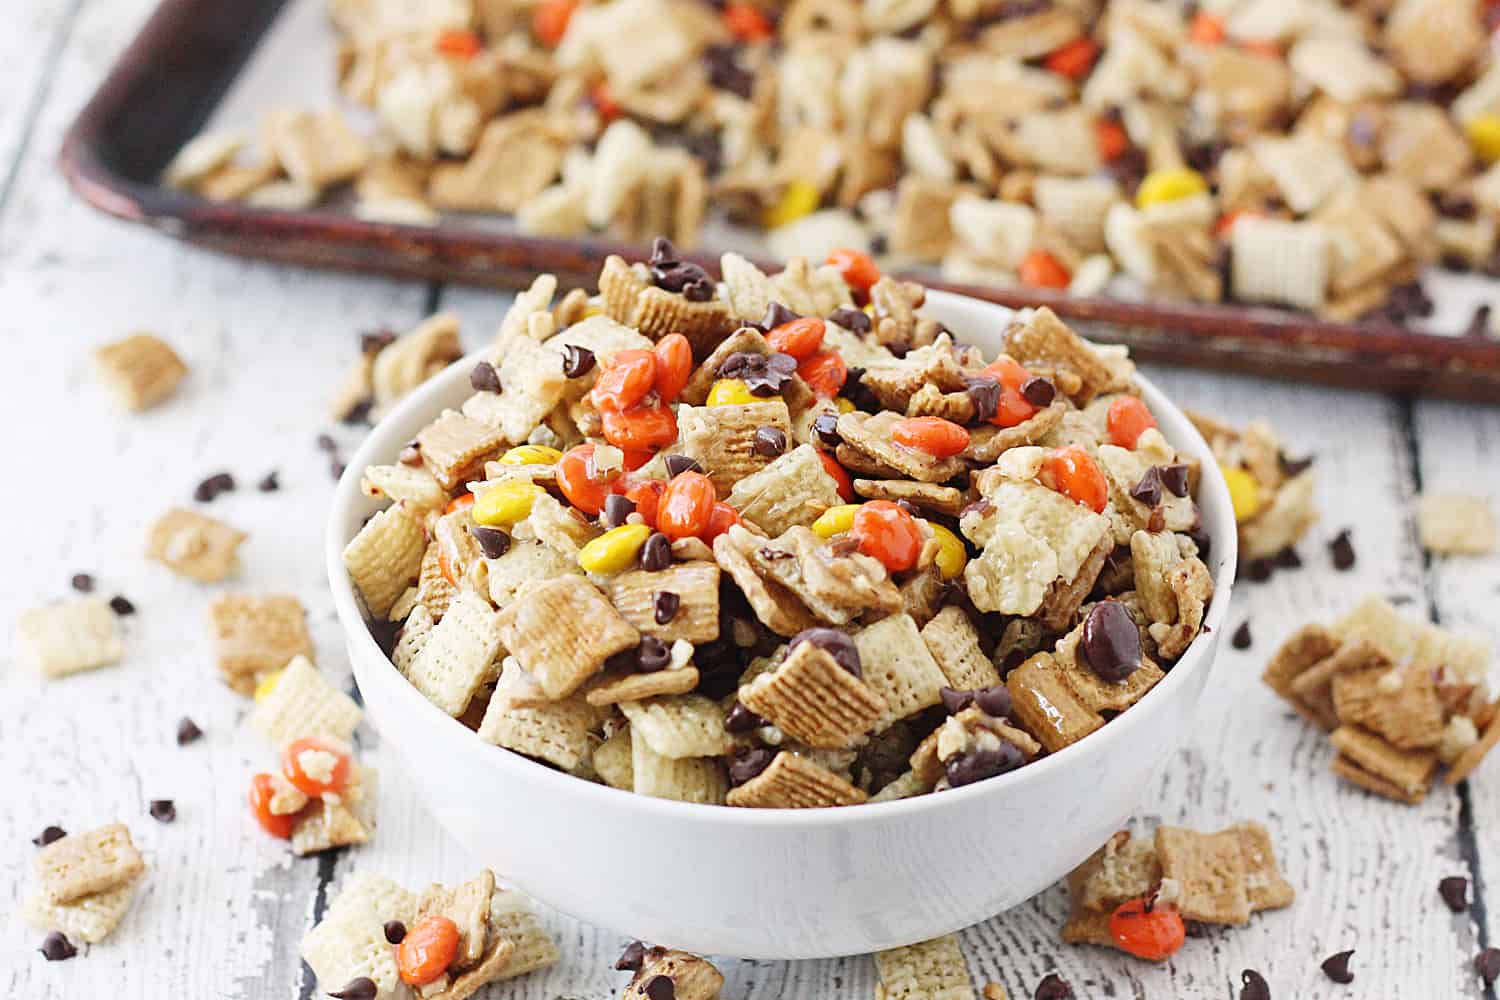 Easy Harvest Chex Mix - Getting your harvest Chex mix fix is easier than you think. Thanks to this easy recipe, that sweet, peanut-buttery fall Chex mix is only a few minutes away!